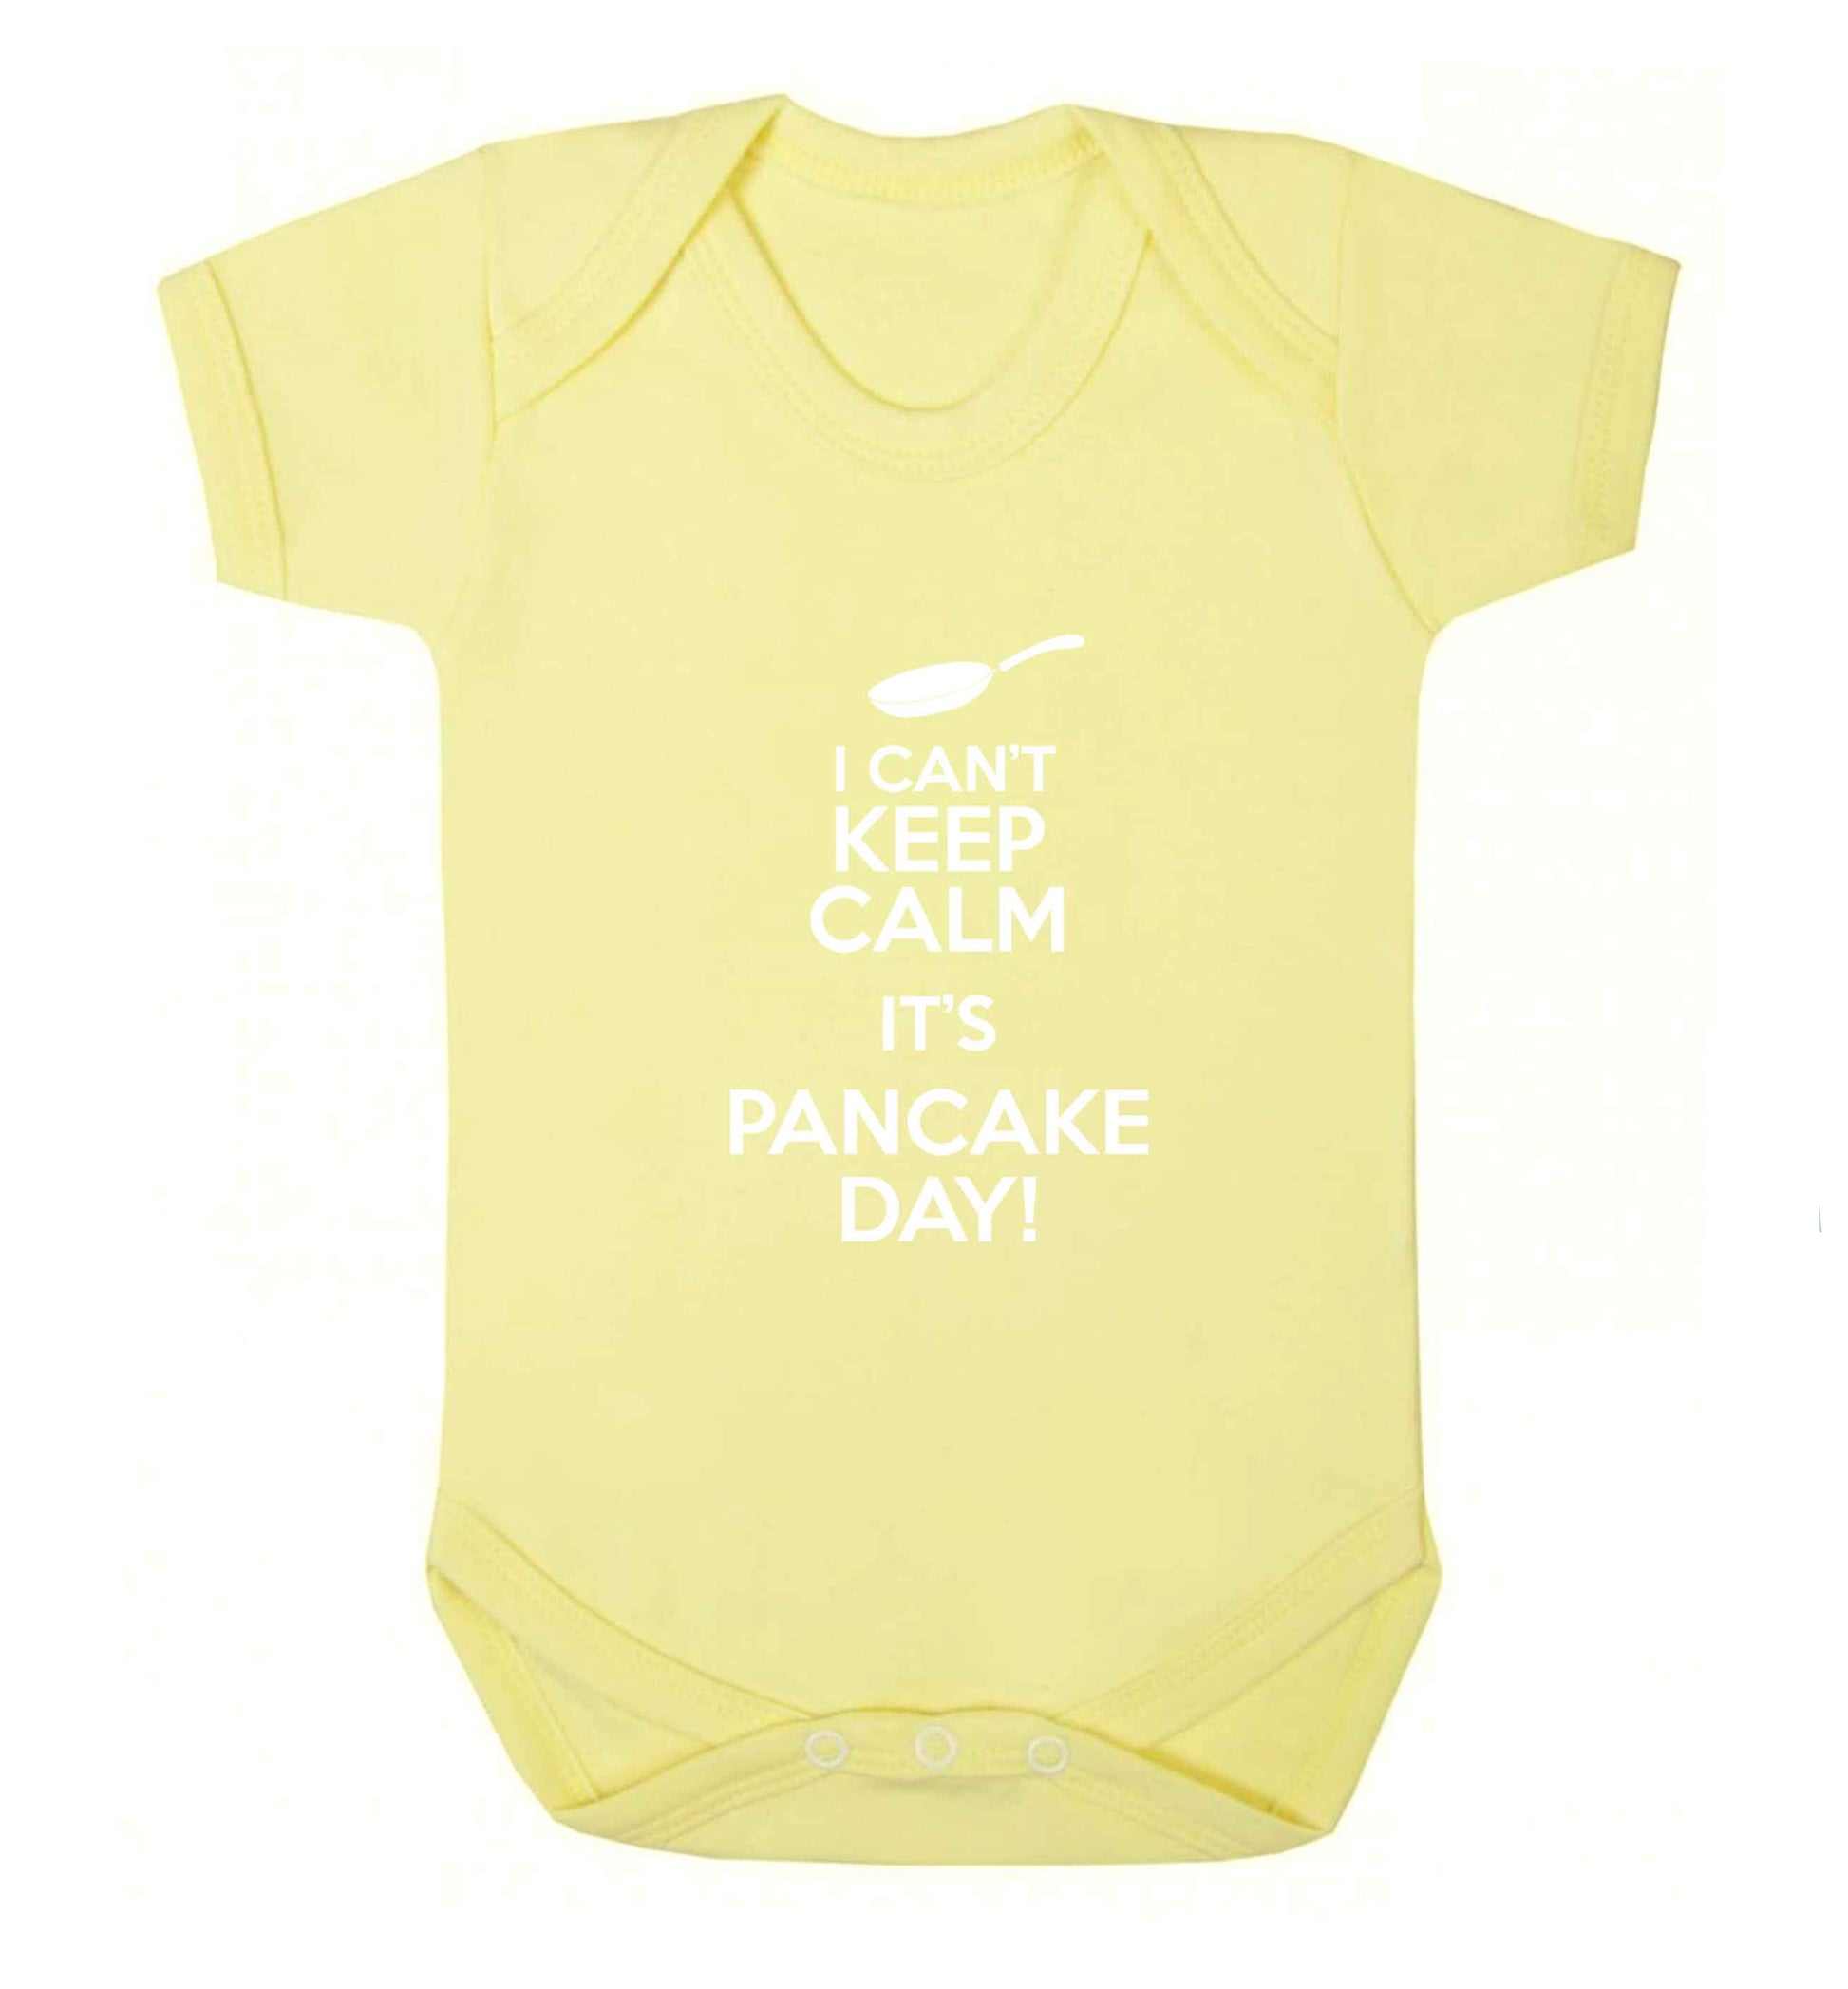 I can't keep calm it's pancake day! baby vest pale yellow 18-24 months